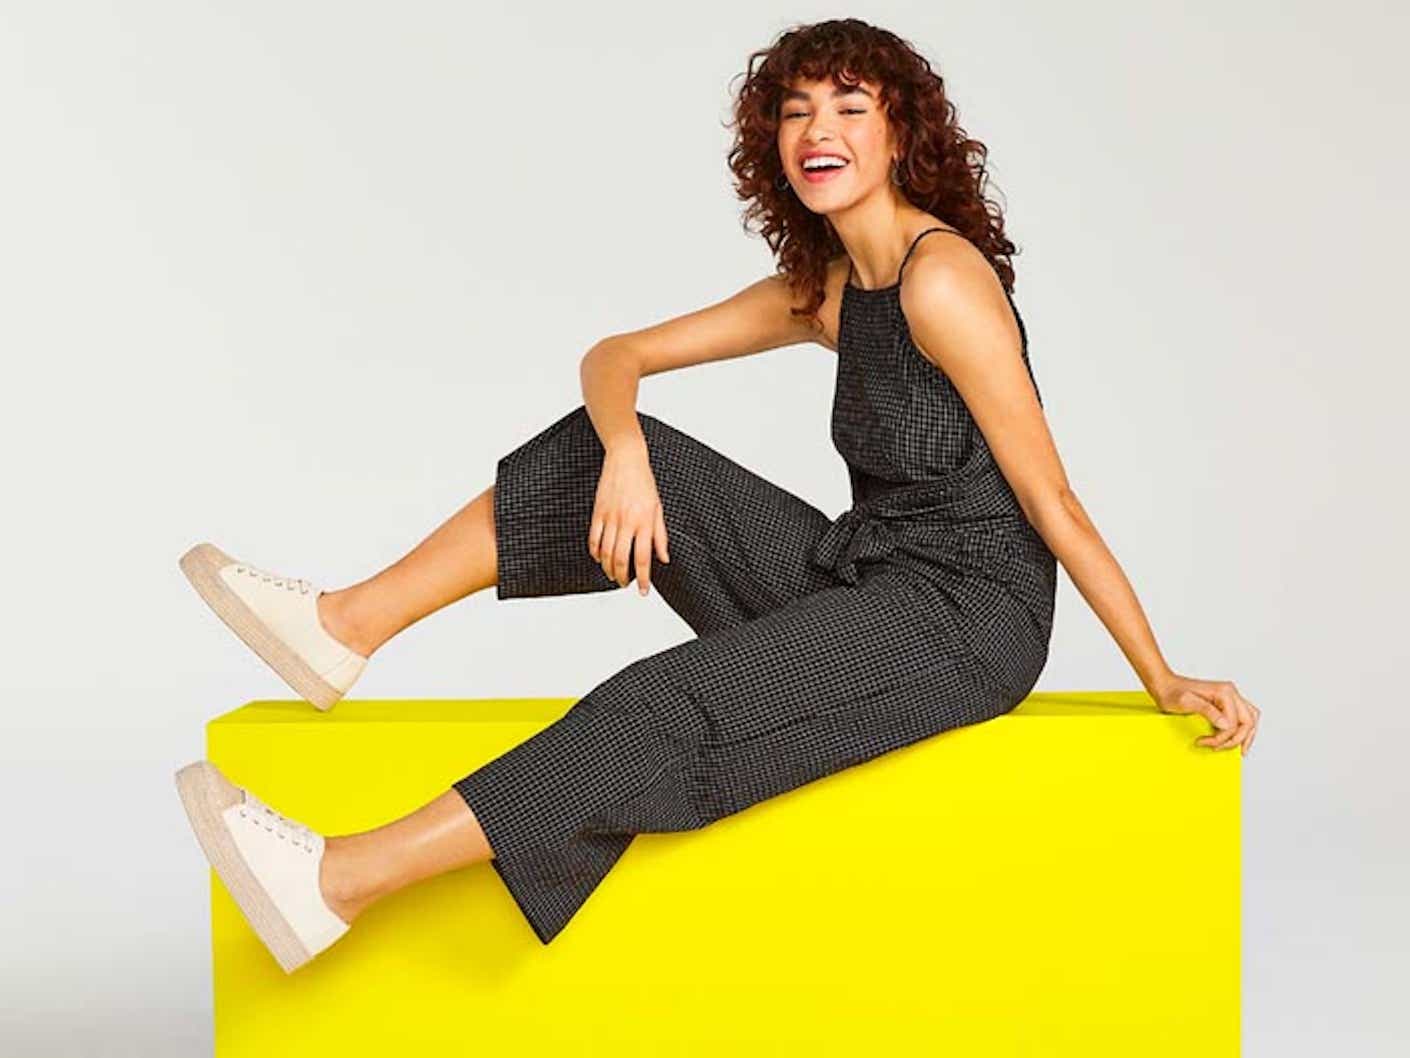 A laughing woman sits on a yellow block while wearing a black jumpsuit with white sneakers.